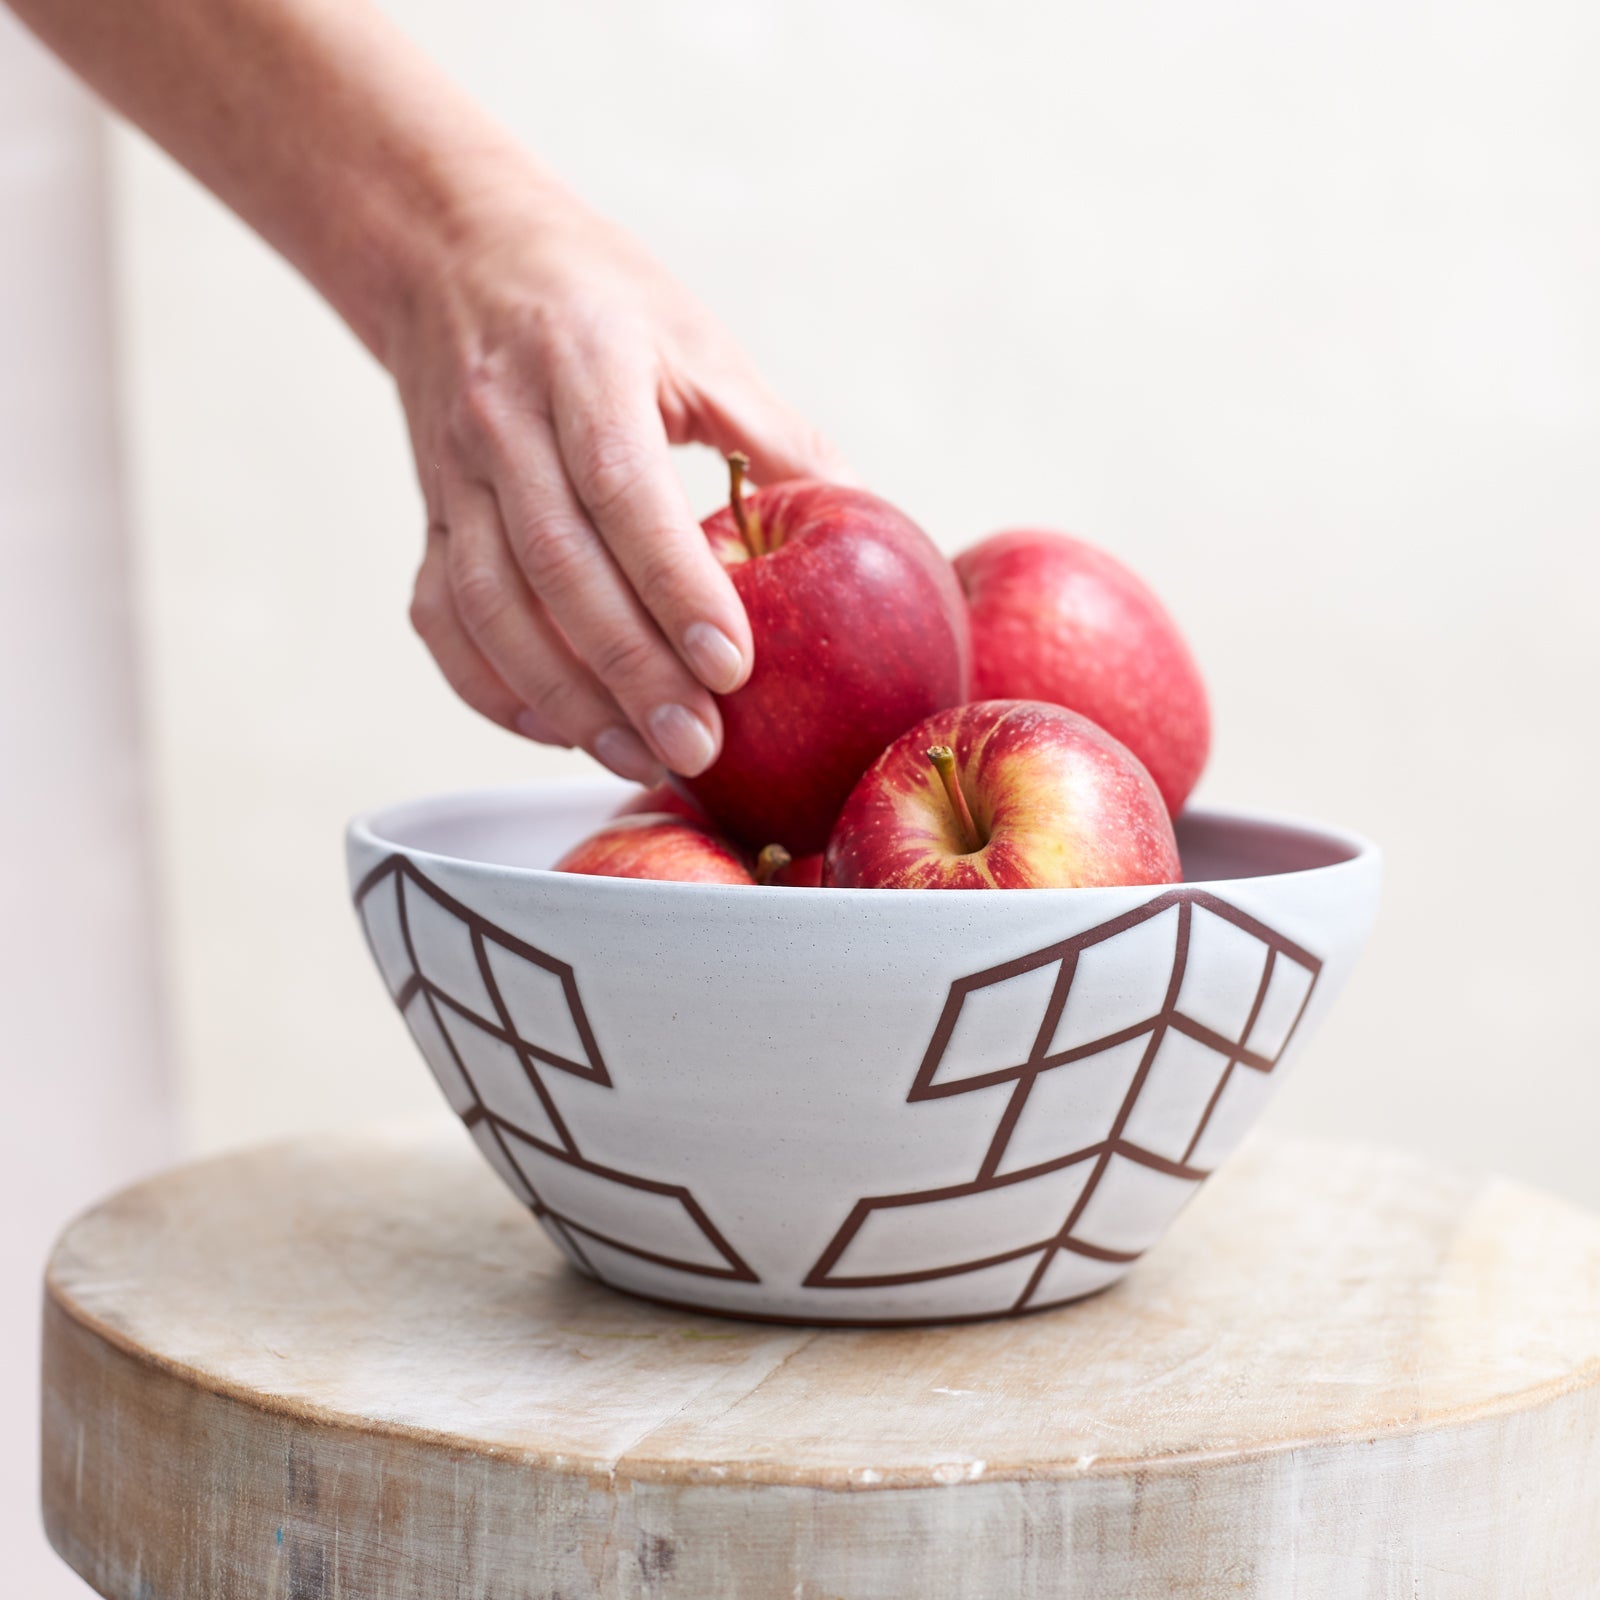 A front view of the 'Geometric Handmade Ceramic Bowl' with a white glaze and mahogany clay. Apples are placed by hand into the ceramic bowl. The handmade ceramic bowl sits on a wooden stool.